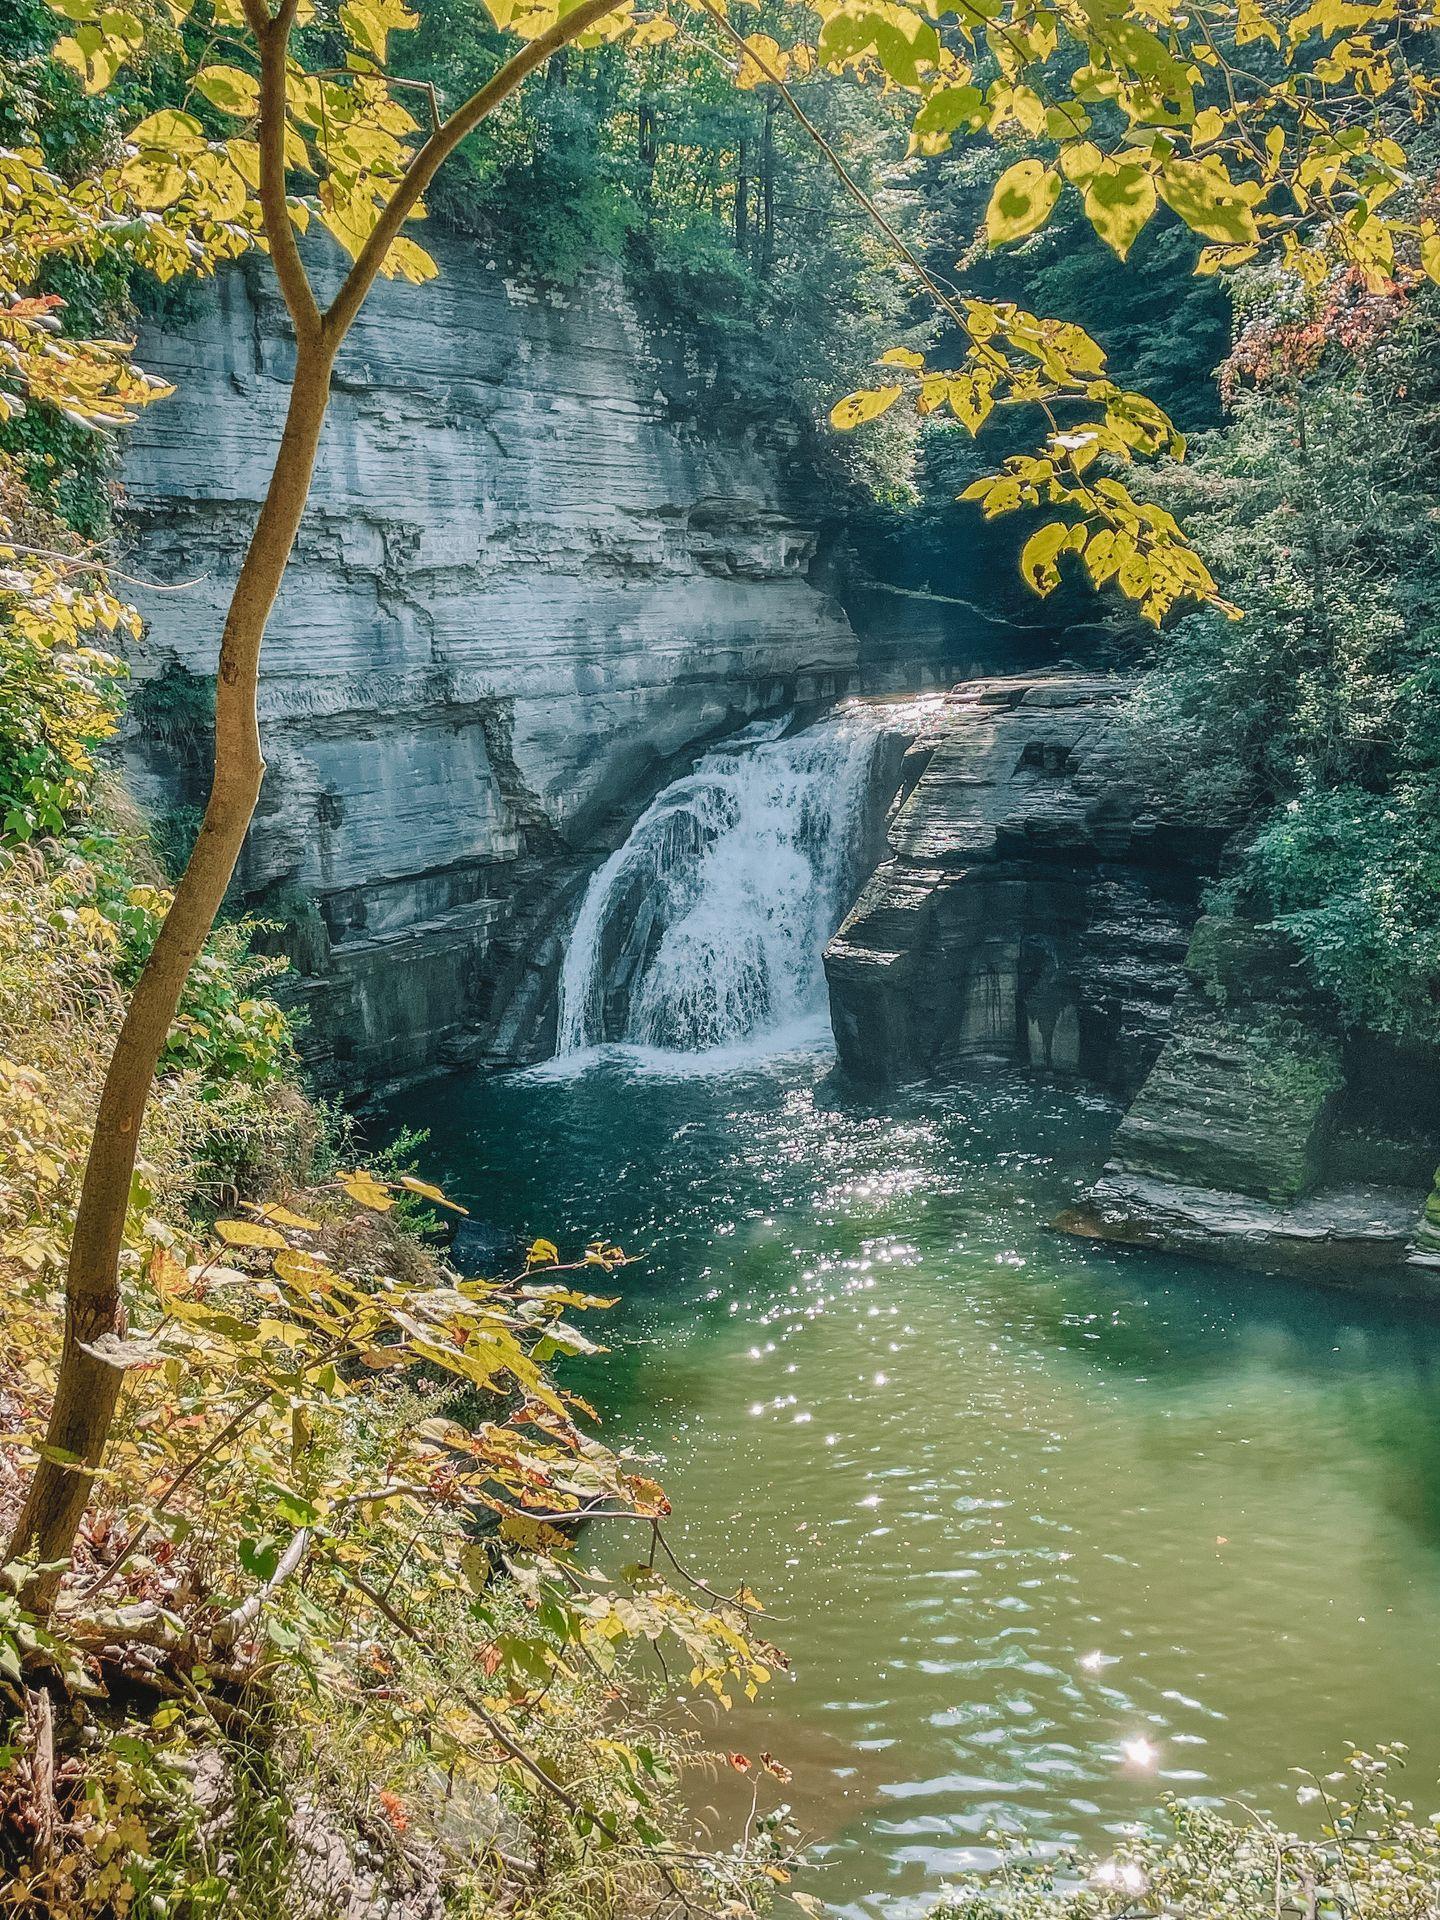 A waterfall in the distance flowing down into a pool of green water. Yellow leaves frame the photo.